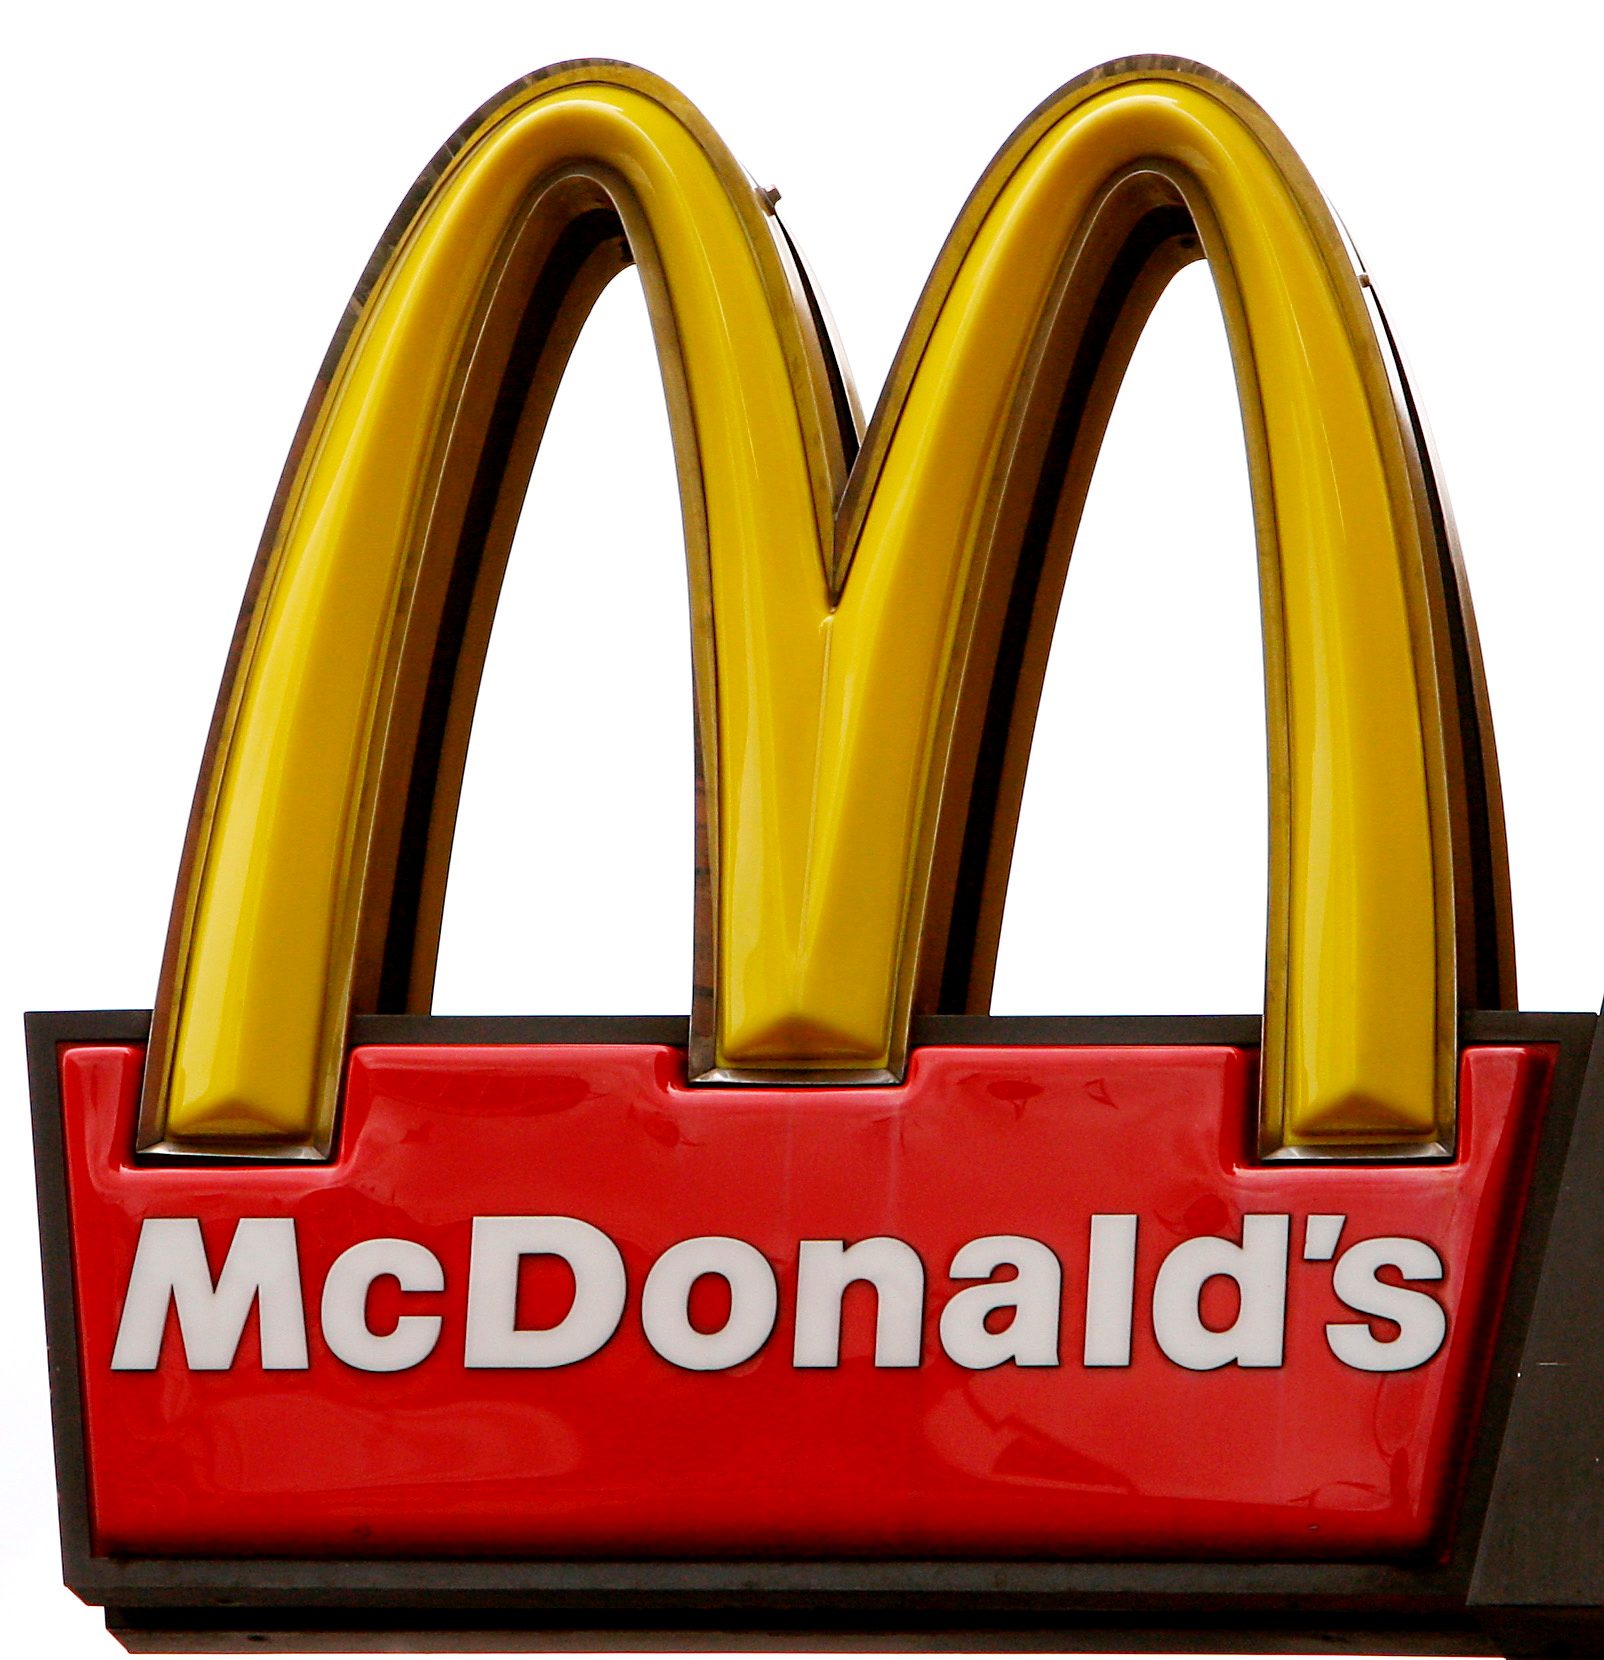 McDonald’s commits to UK with 5,000 new jobs